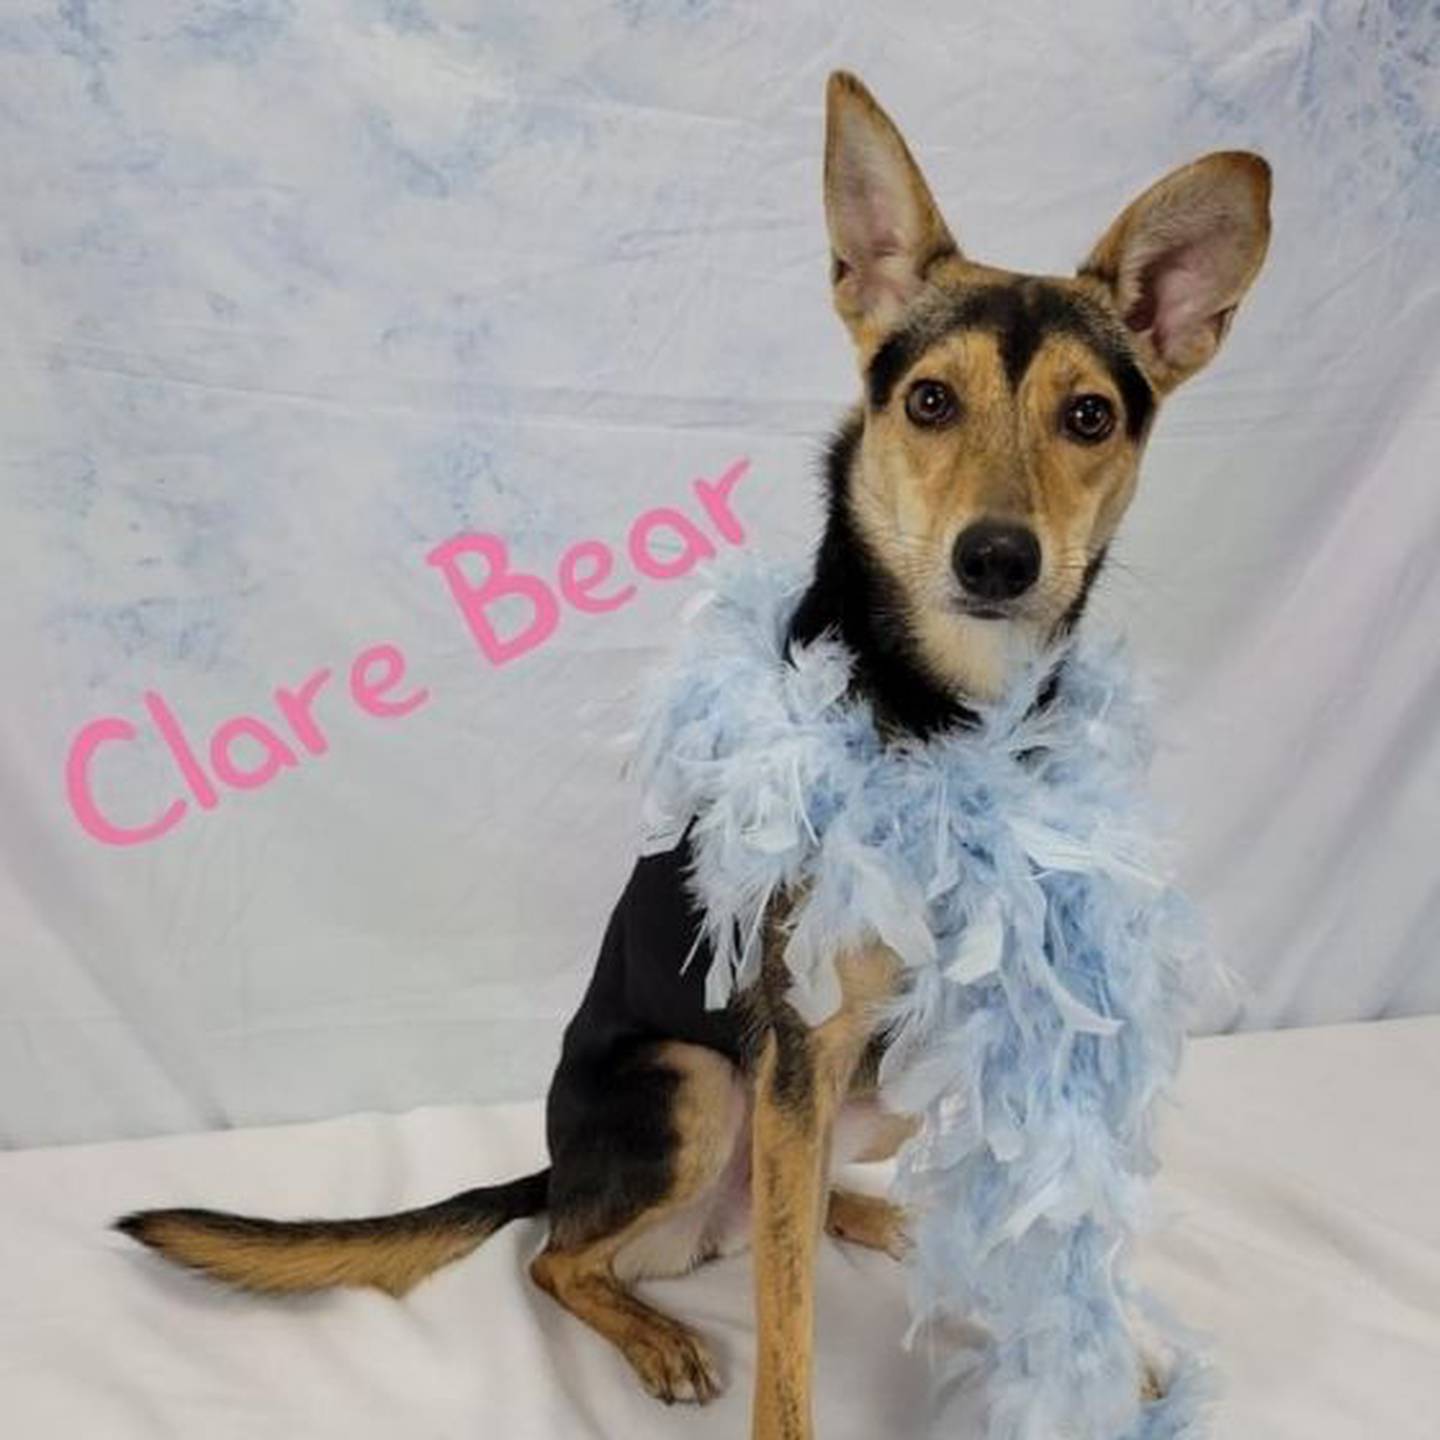 Clare Bear is a  7 -month- old sweet and petite girl. Clare Bear has it all looks, smarts, and she is super affectionate! The only thing missing in our sweet girl’s life is you! Believe us - this little lady is amazing for being so young! Adoption fee includes spay, rabies shot, distemper, microchip and fecal exam. Please contact Hopeful Tails Animal Rescue if you are interested today at hopefultailsadoptions@outlook.com